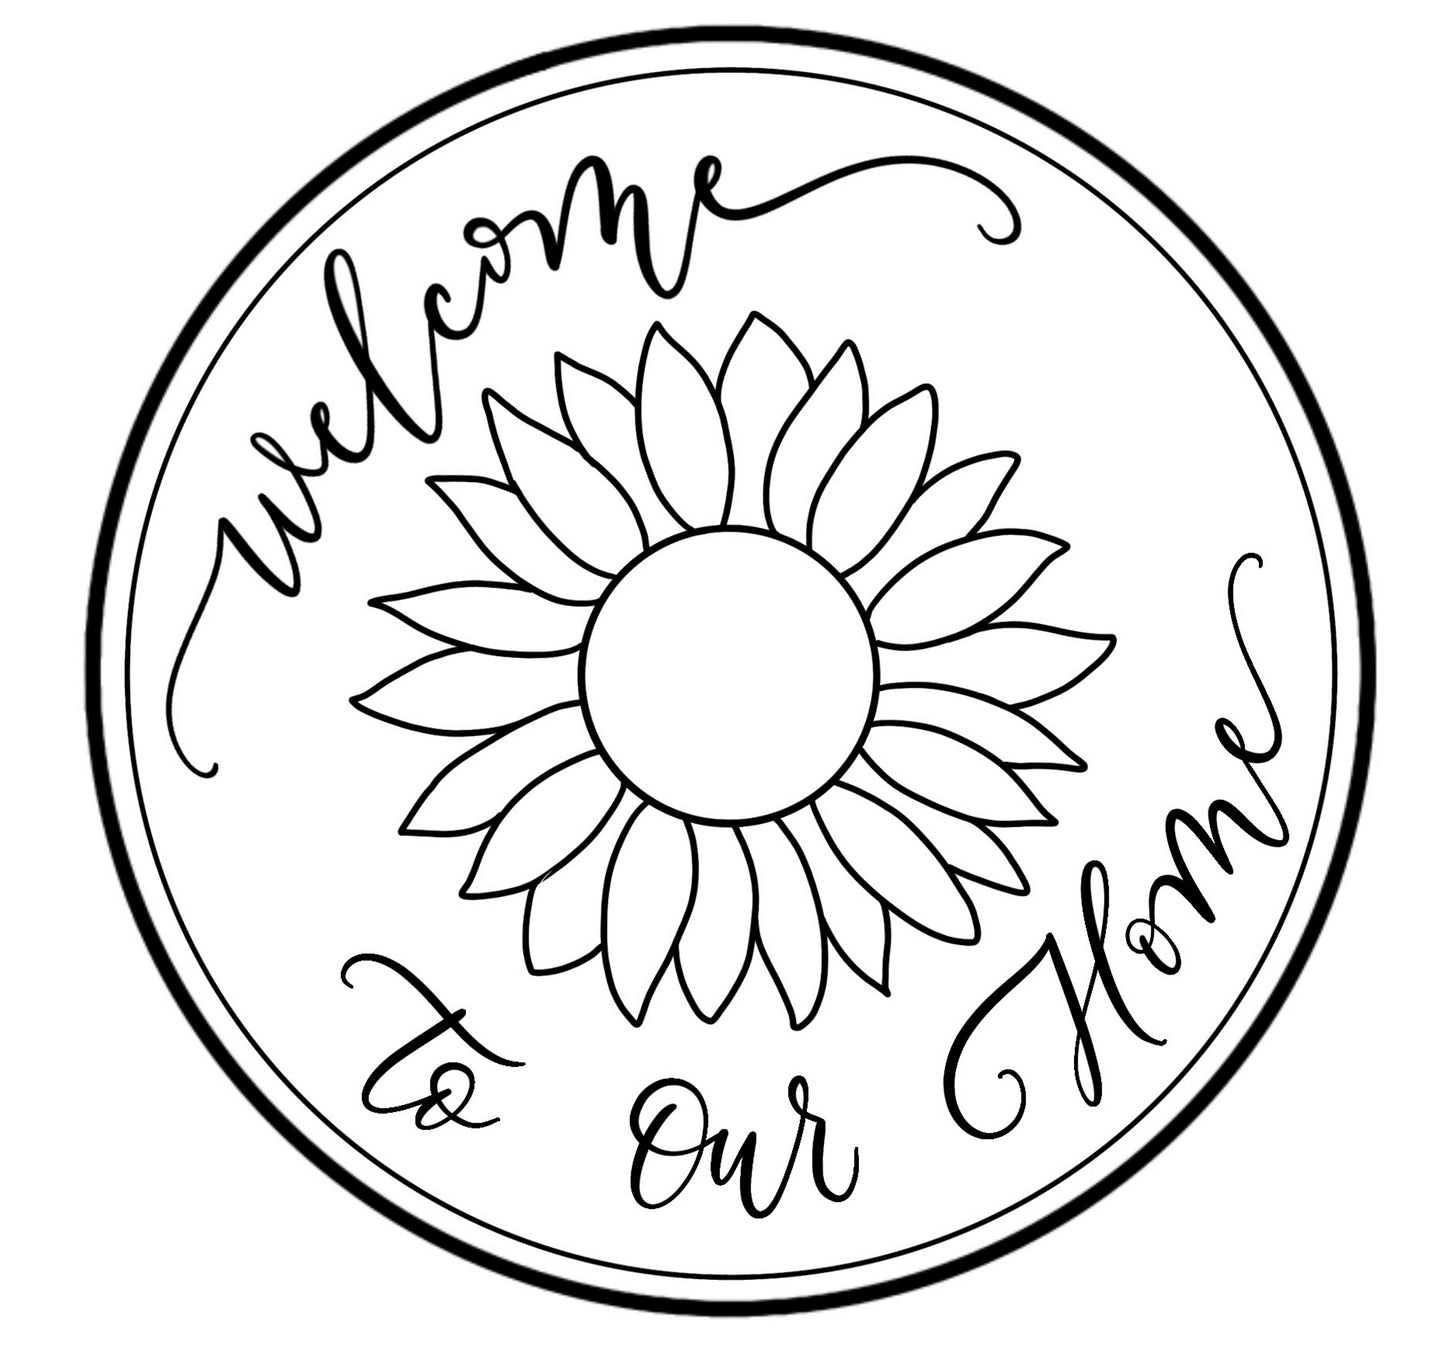 Paint by line- Welcome Sunflower